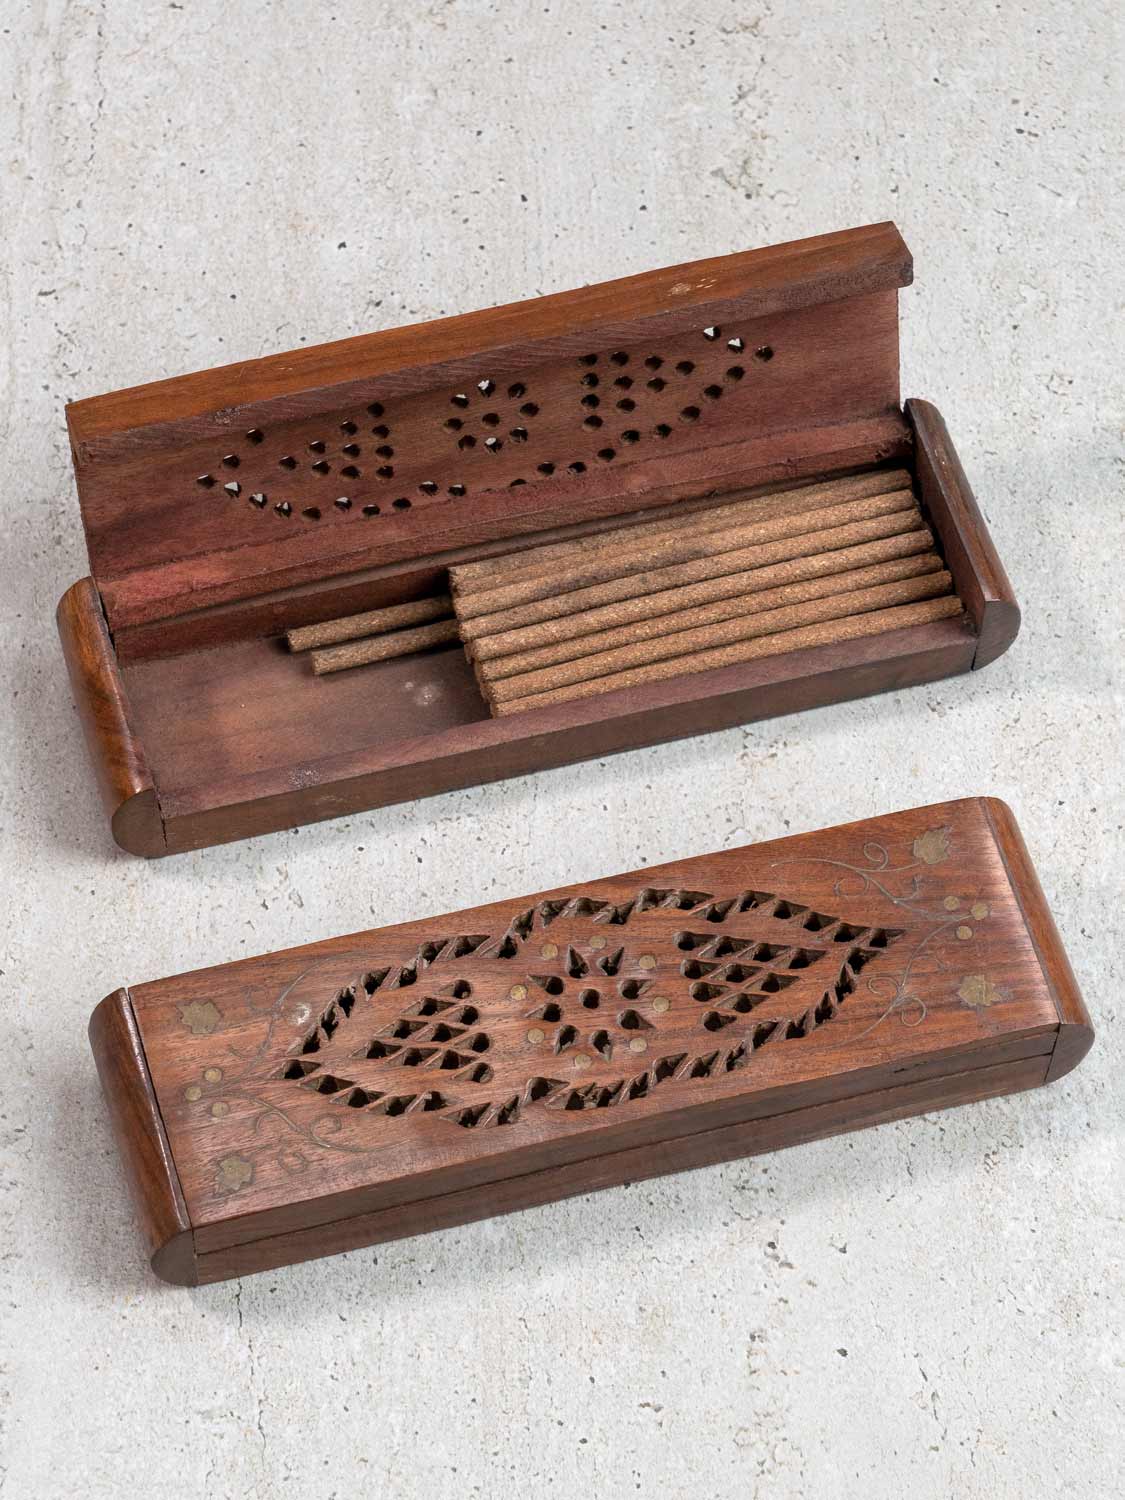 Carved Wooden Indian Pencil Box